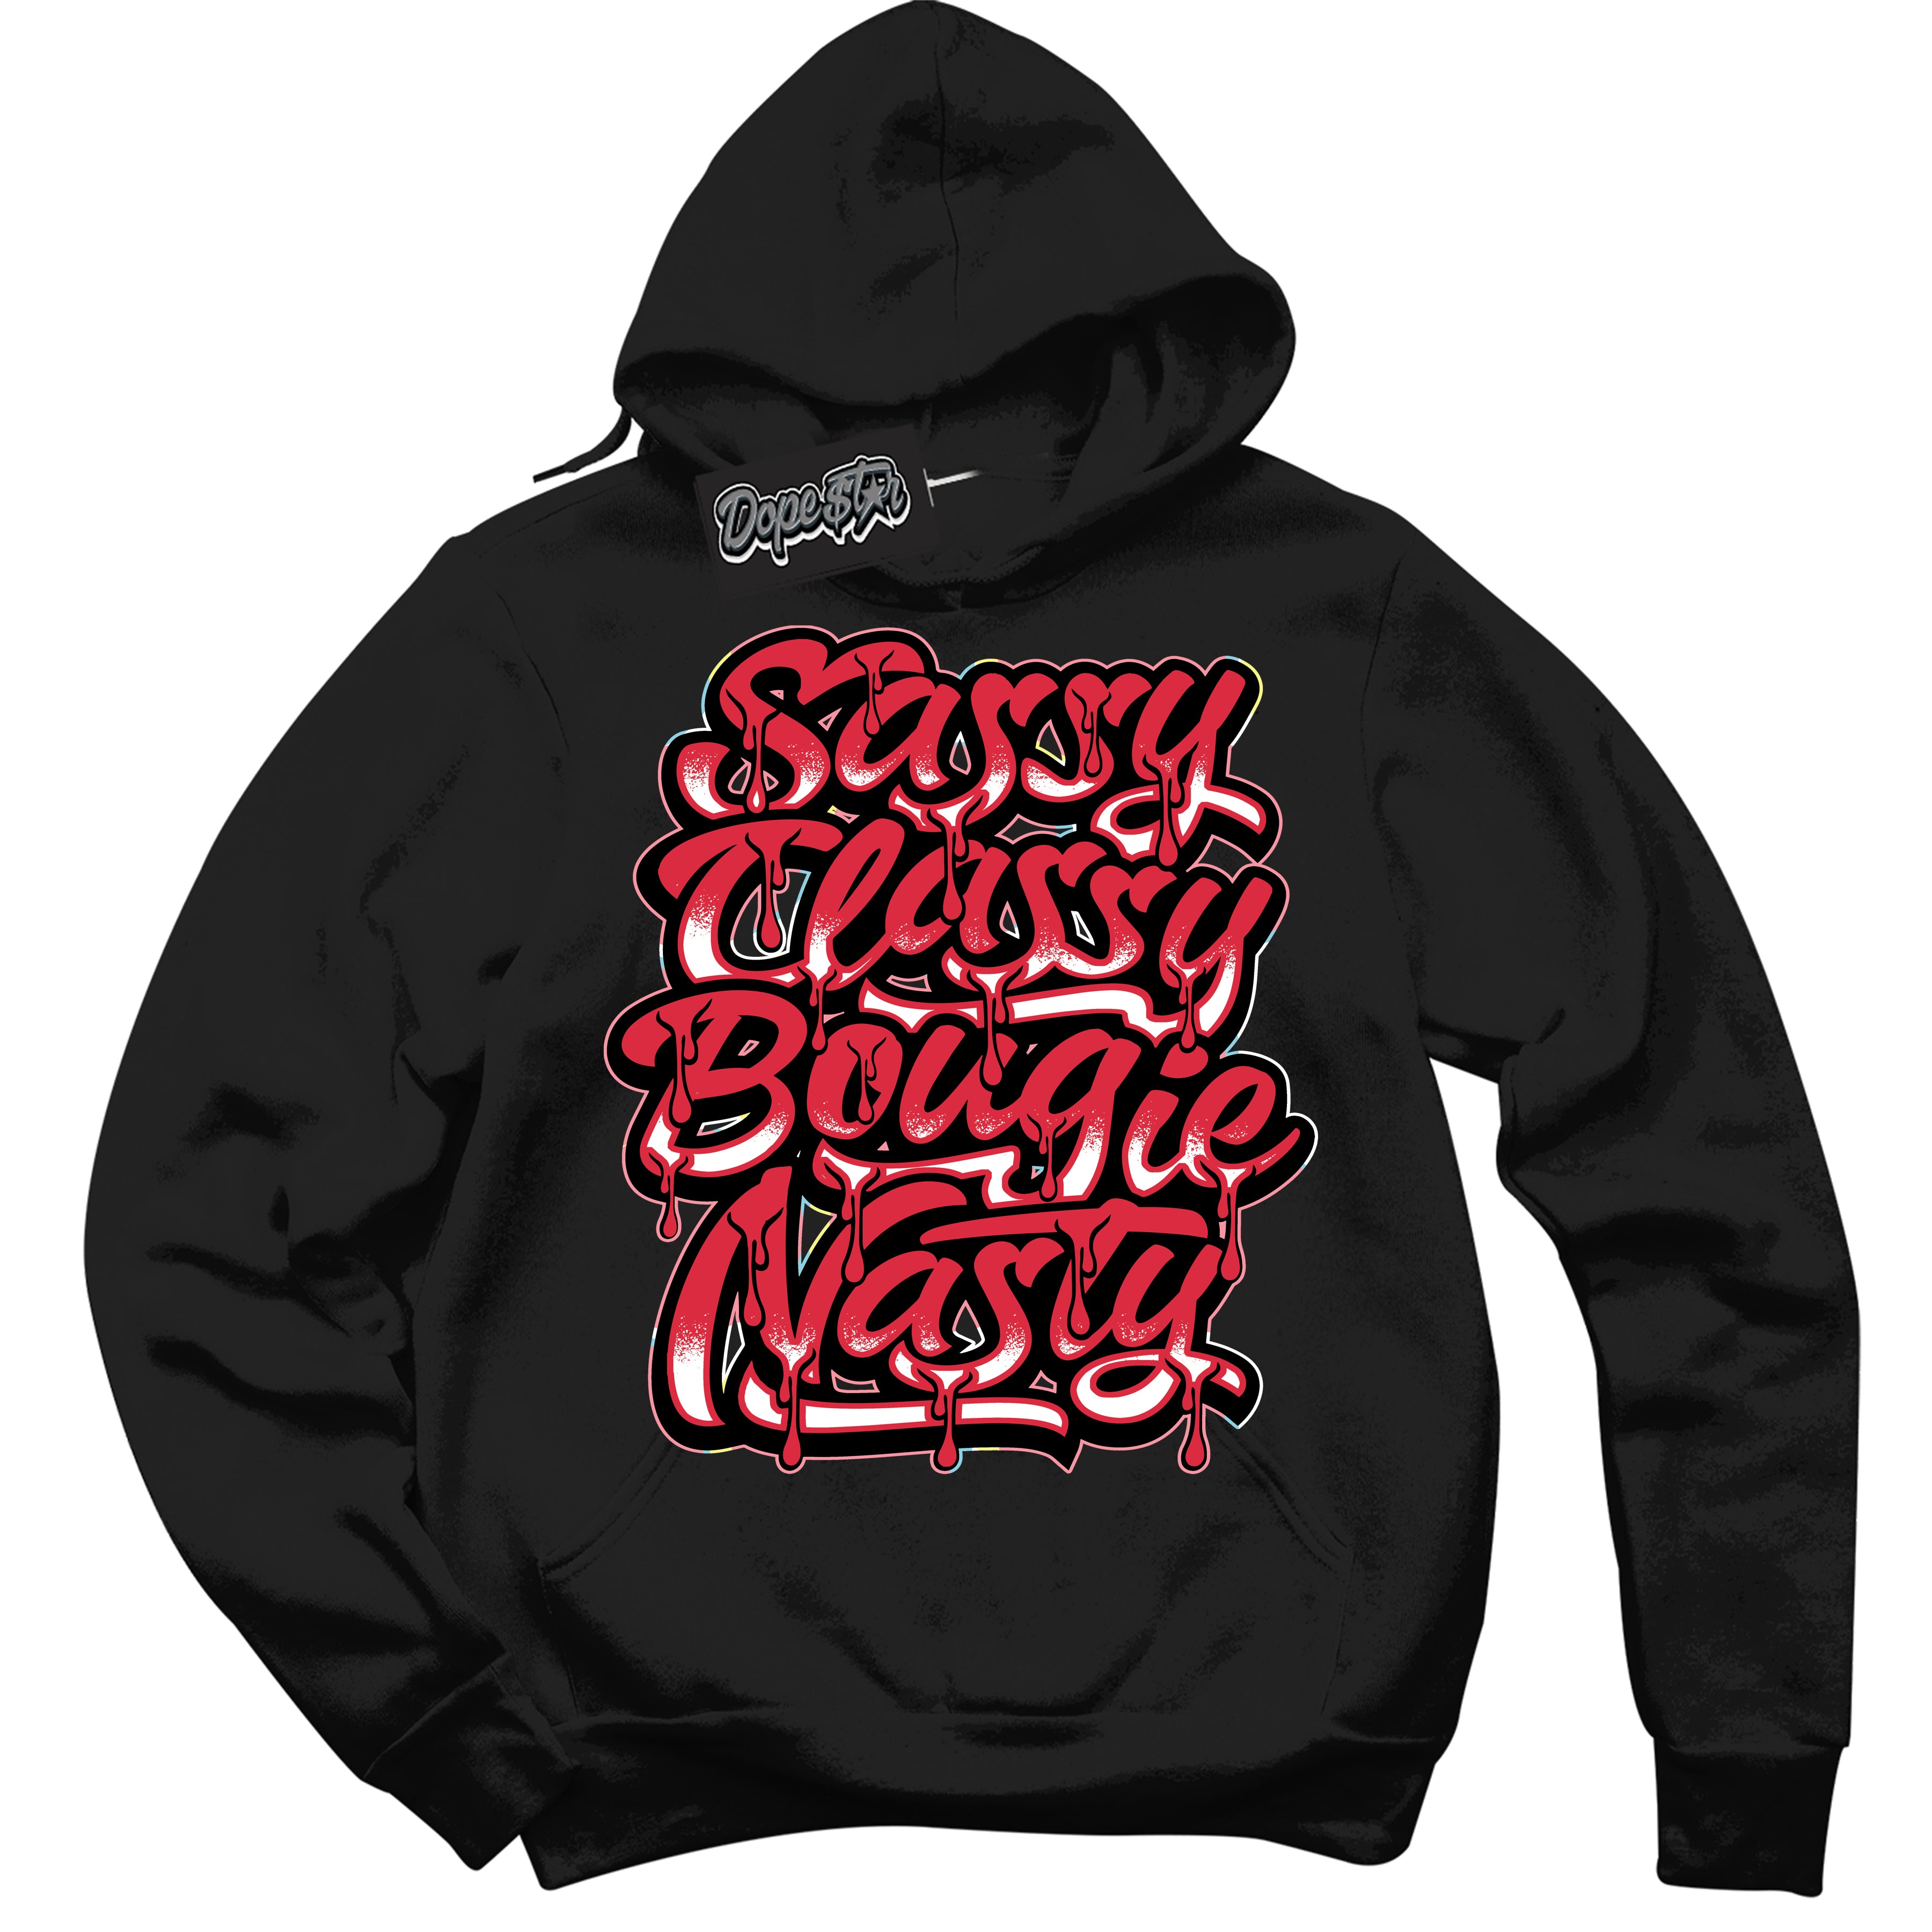 Cool Black Graphic DopeStar Hoodie with “ Sassy Classy “ print, that perfectly matches Spider-Verse 1s sneakers